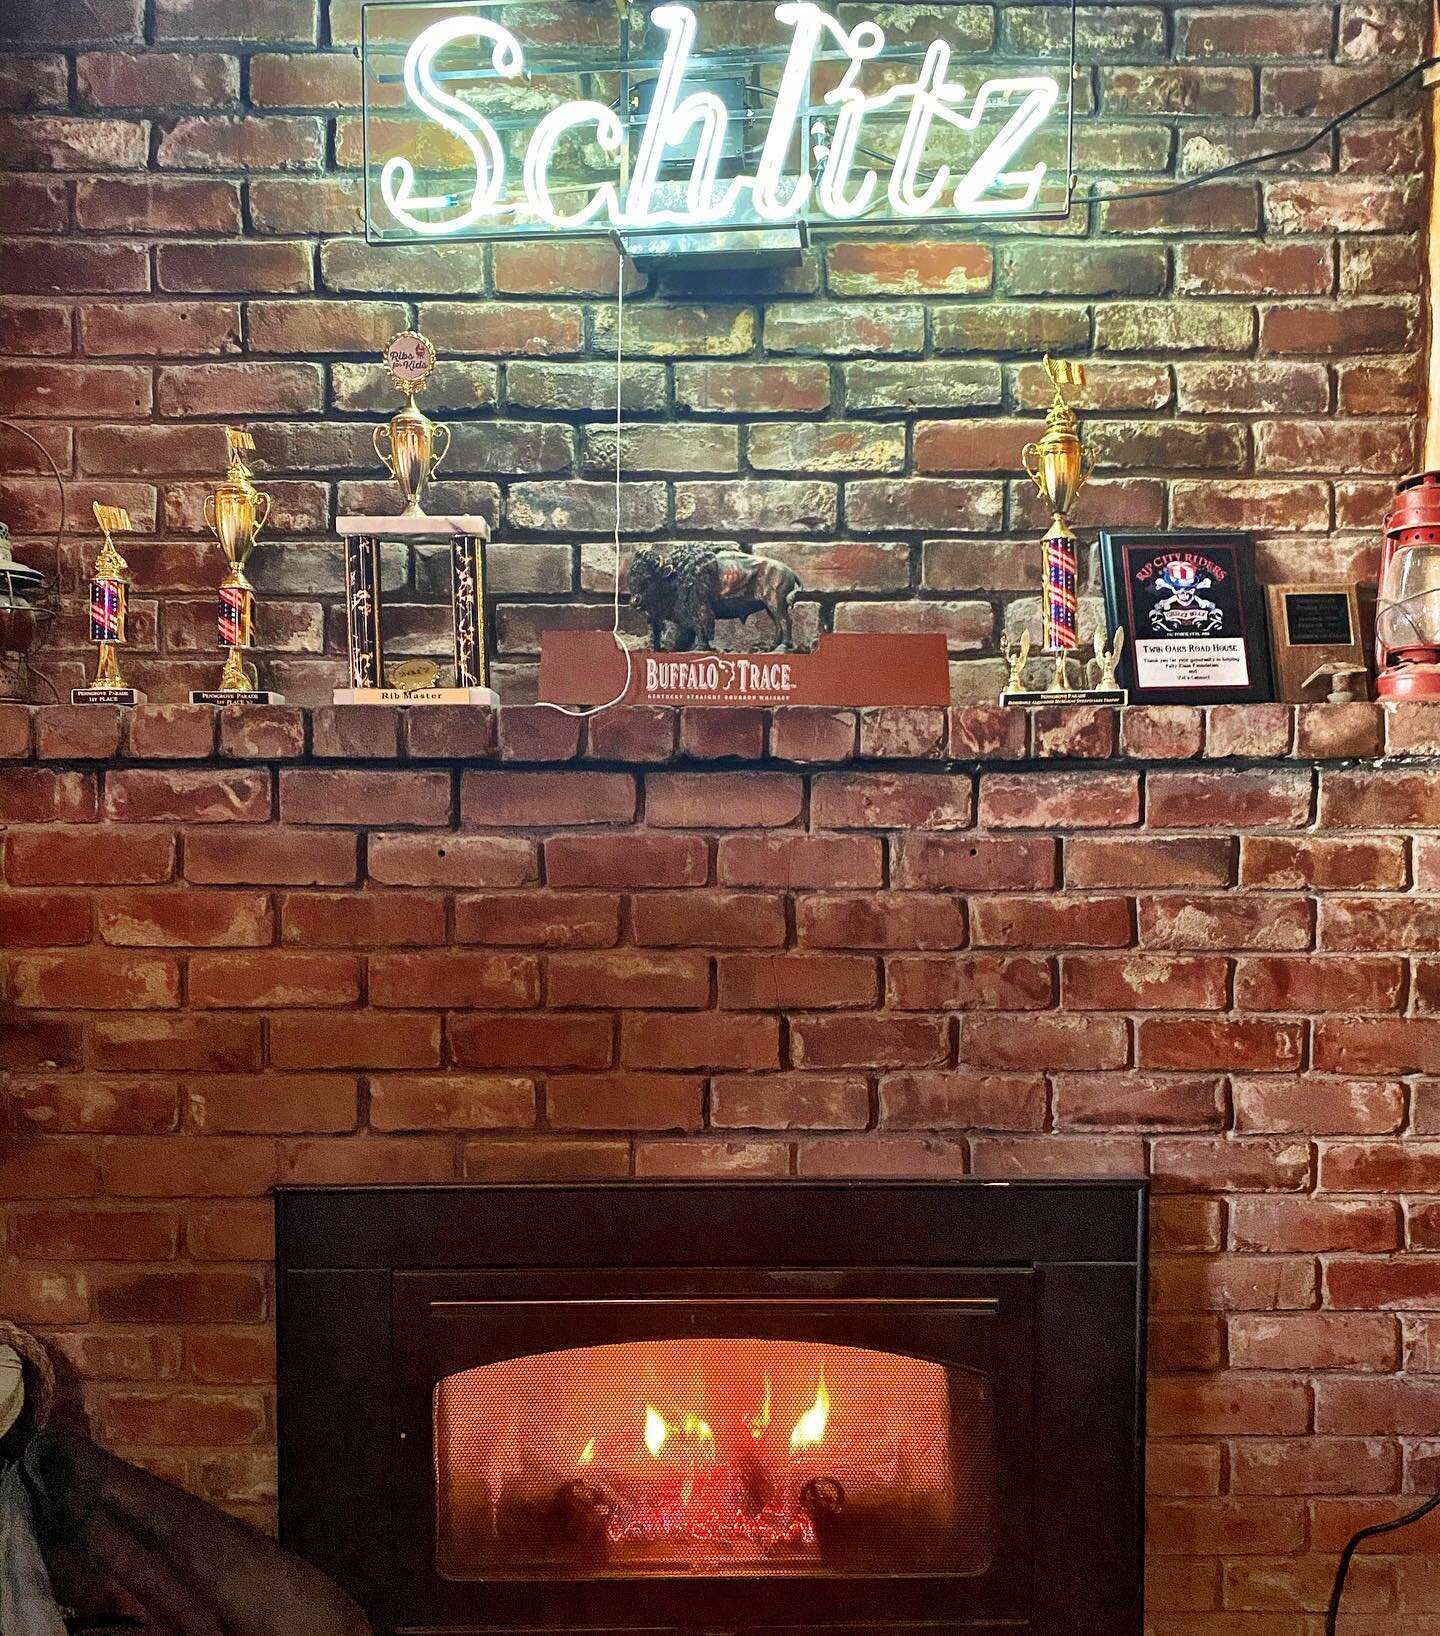 Rainy day #Roadhouse Vibes&hellip;
Come get cozy! 🔥

#penngrove #sonomacounty #fireplacelove